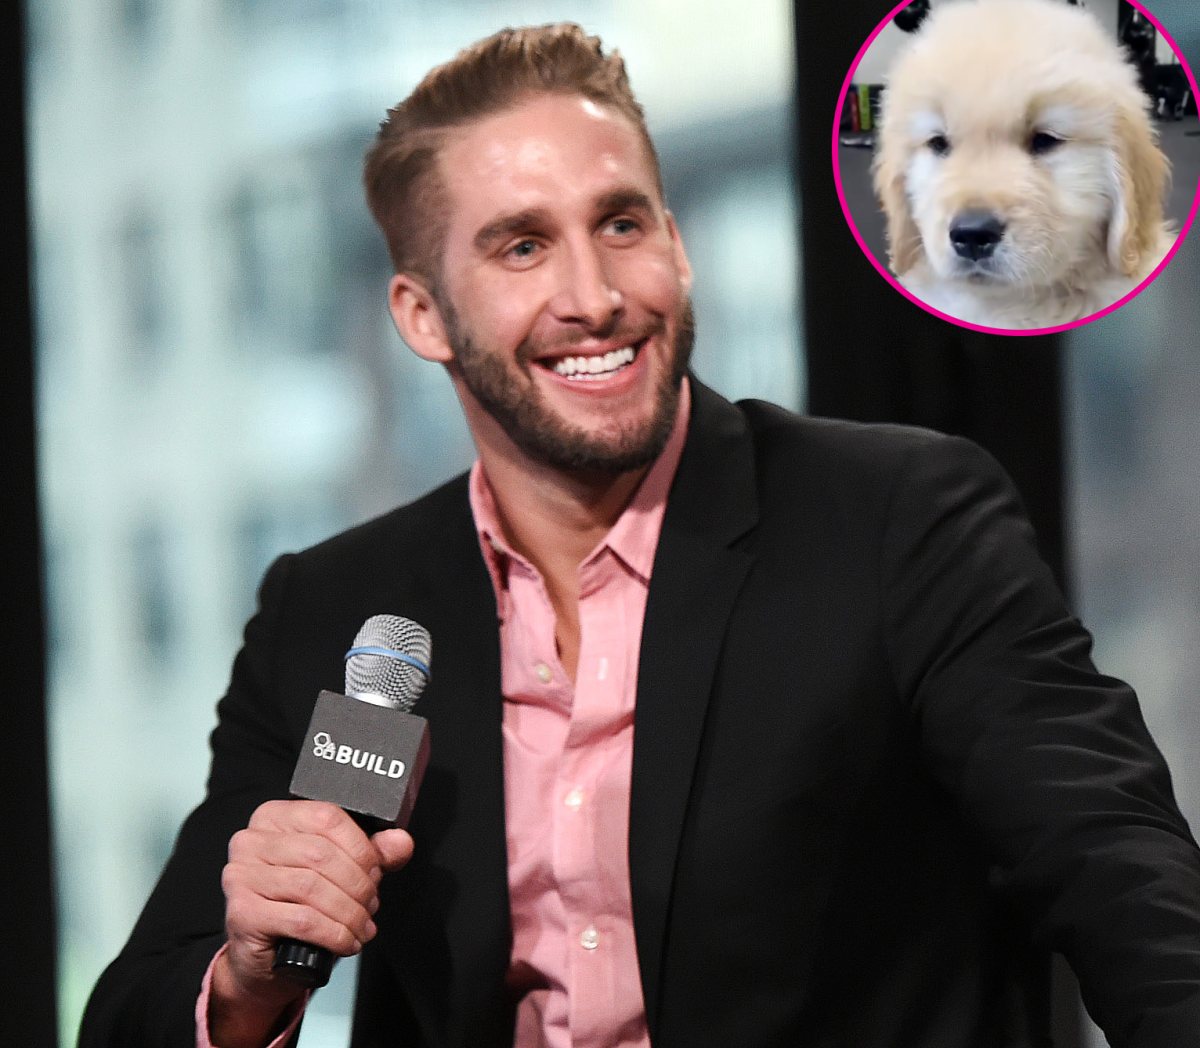 Shawn Booth Gets Adorable New Puppy Named Walter